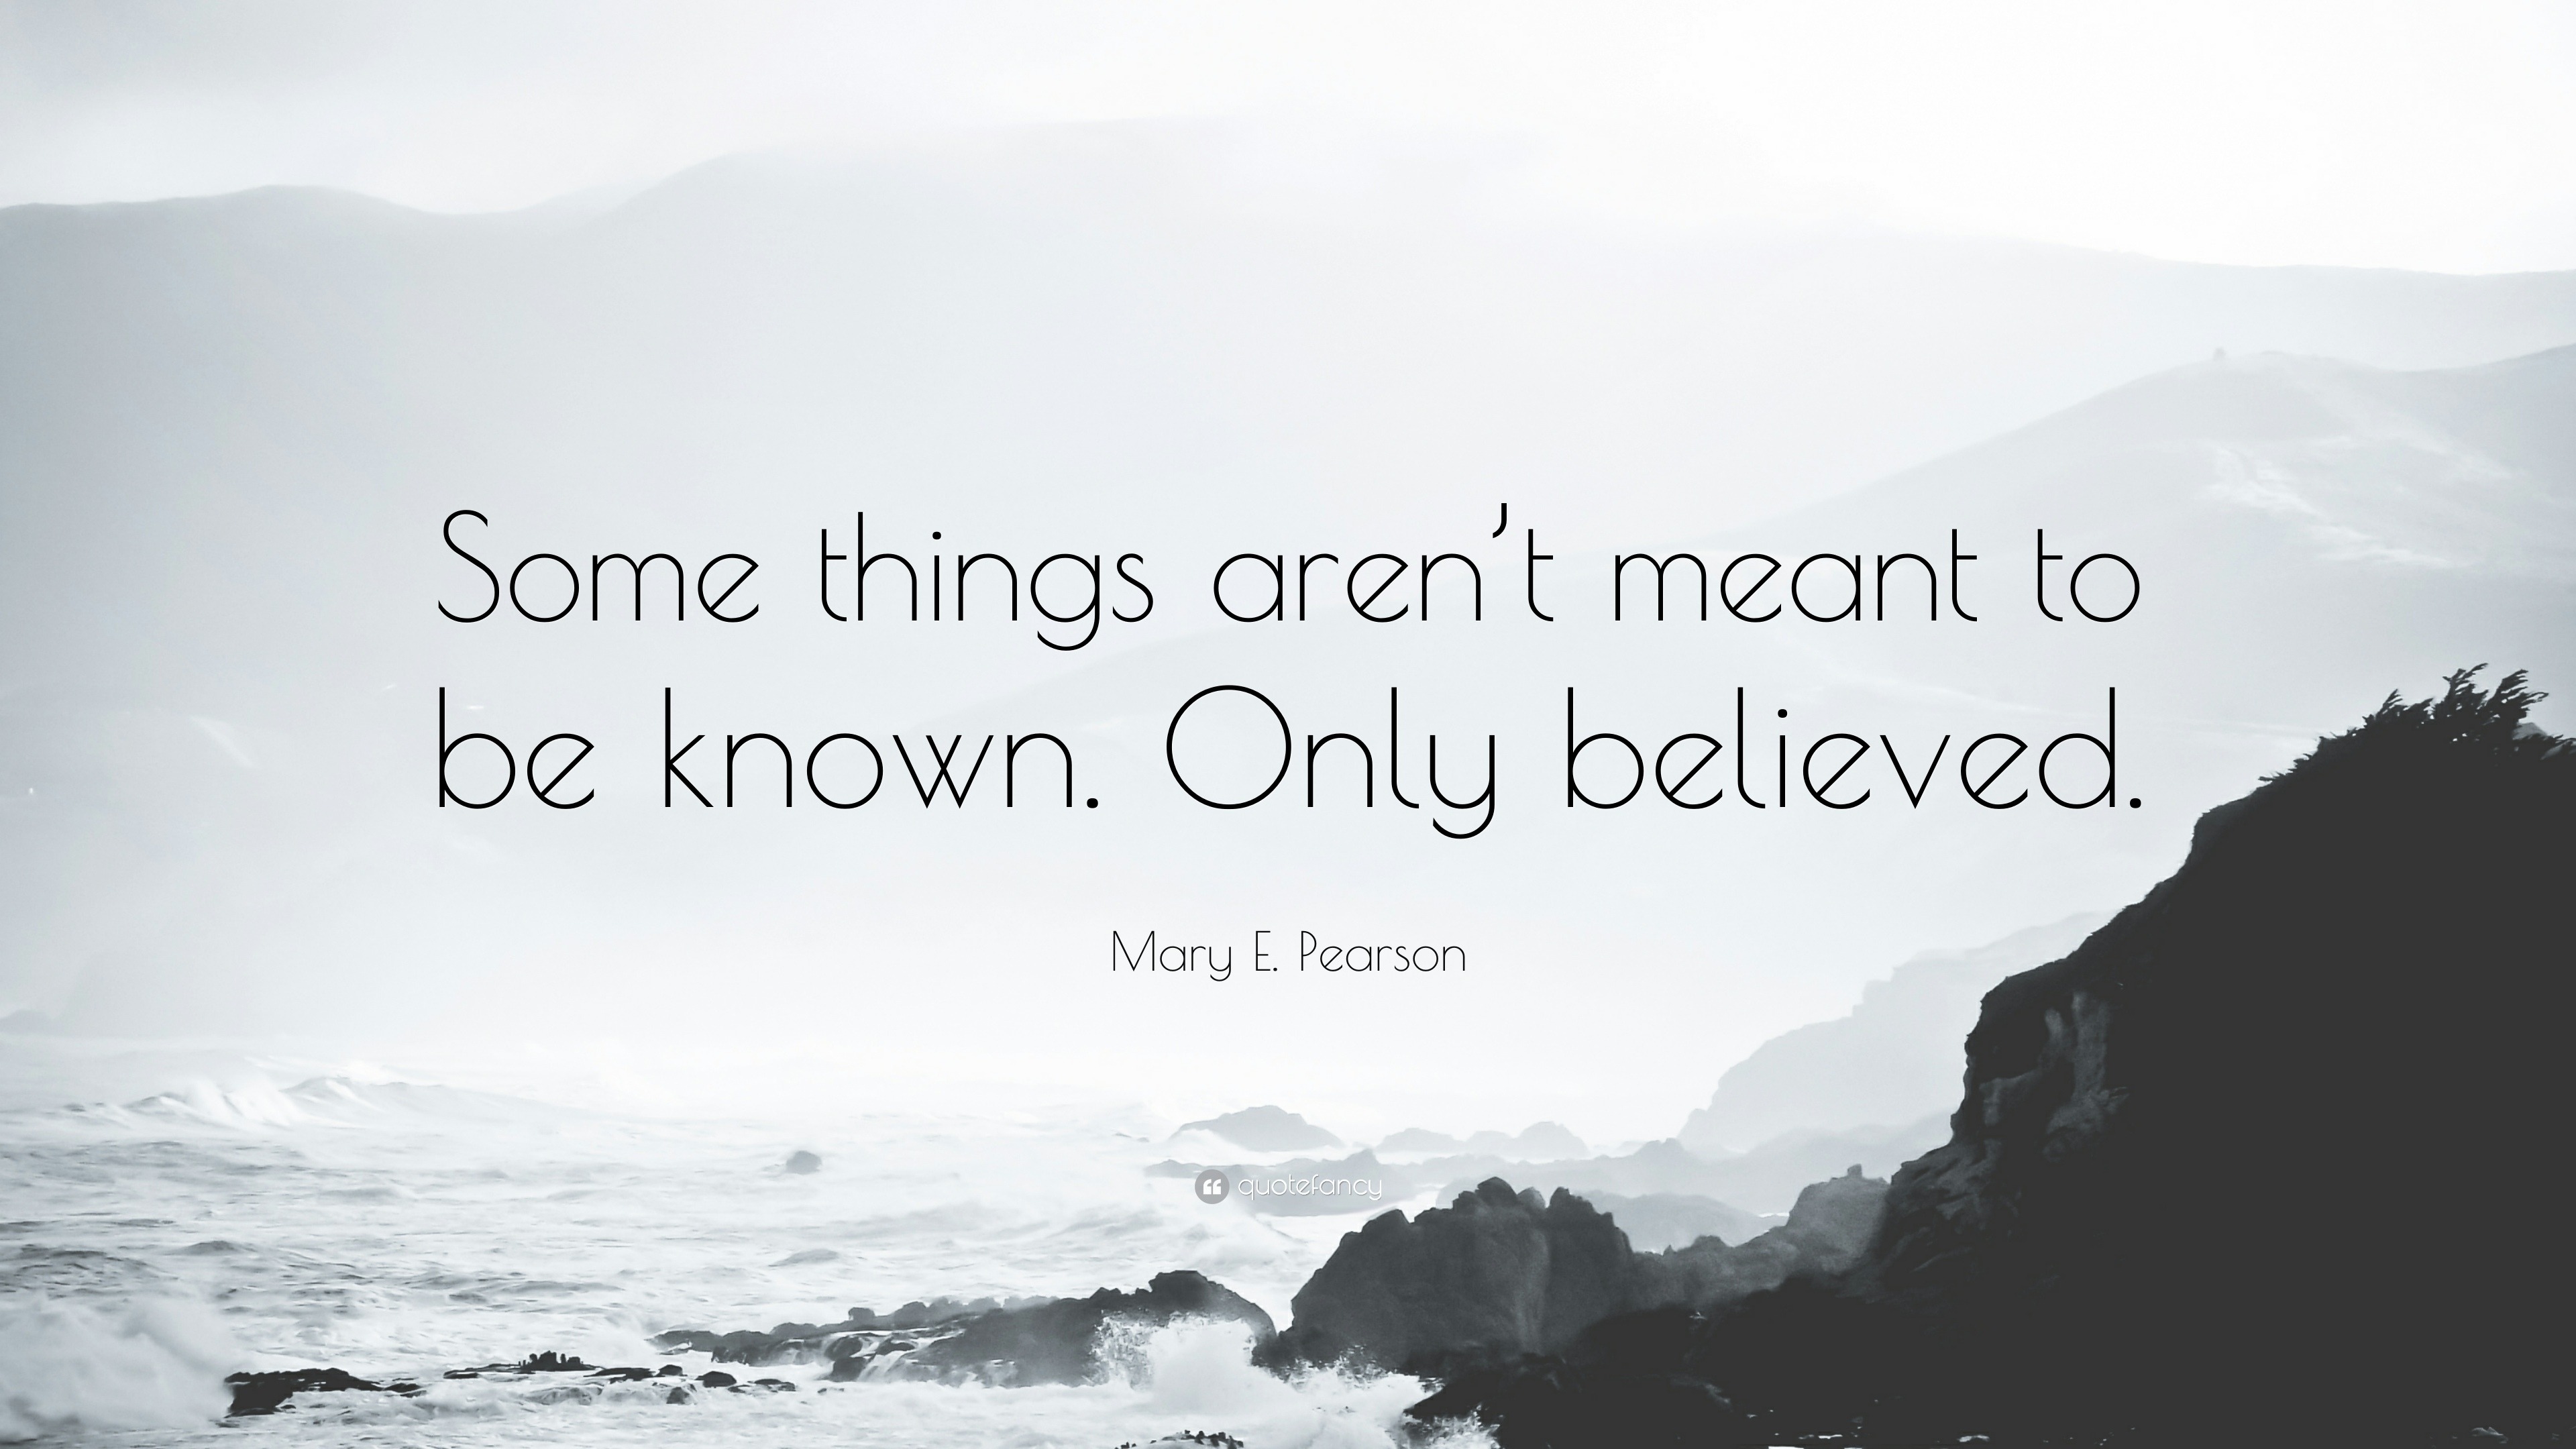 Mary E. Pearson Quote: “Some Things Aren't Meant To Be Known. Only Believed.”